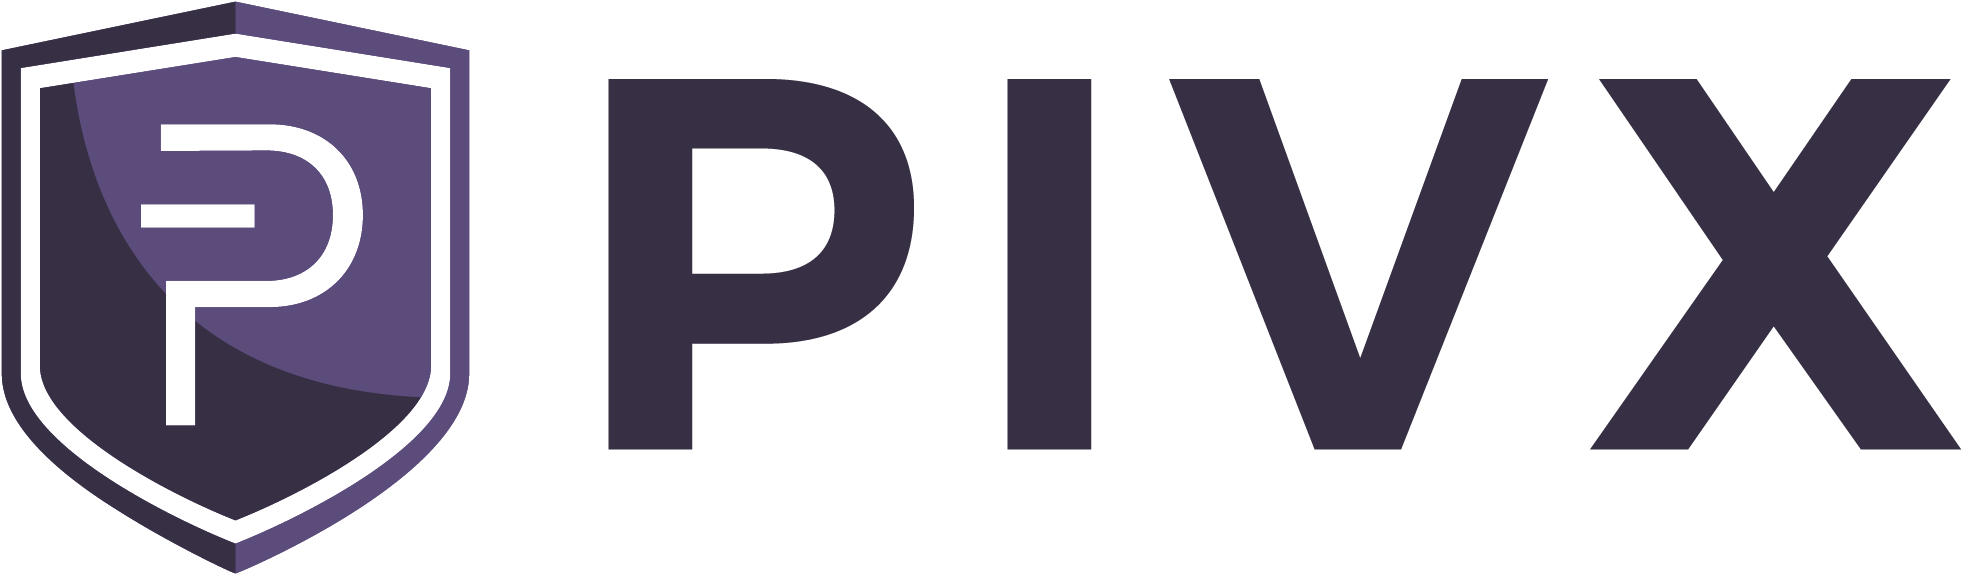 P I V X Cryptocurrency Logo PNG